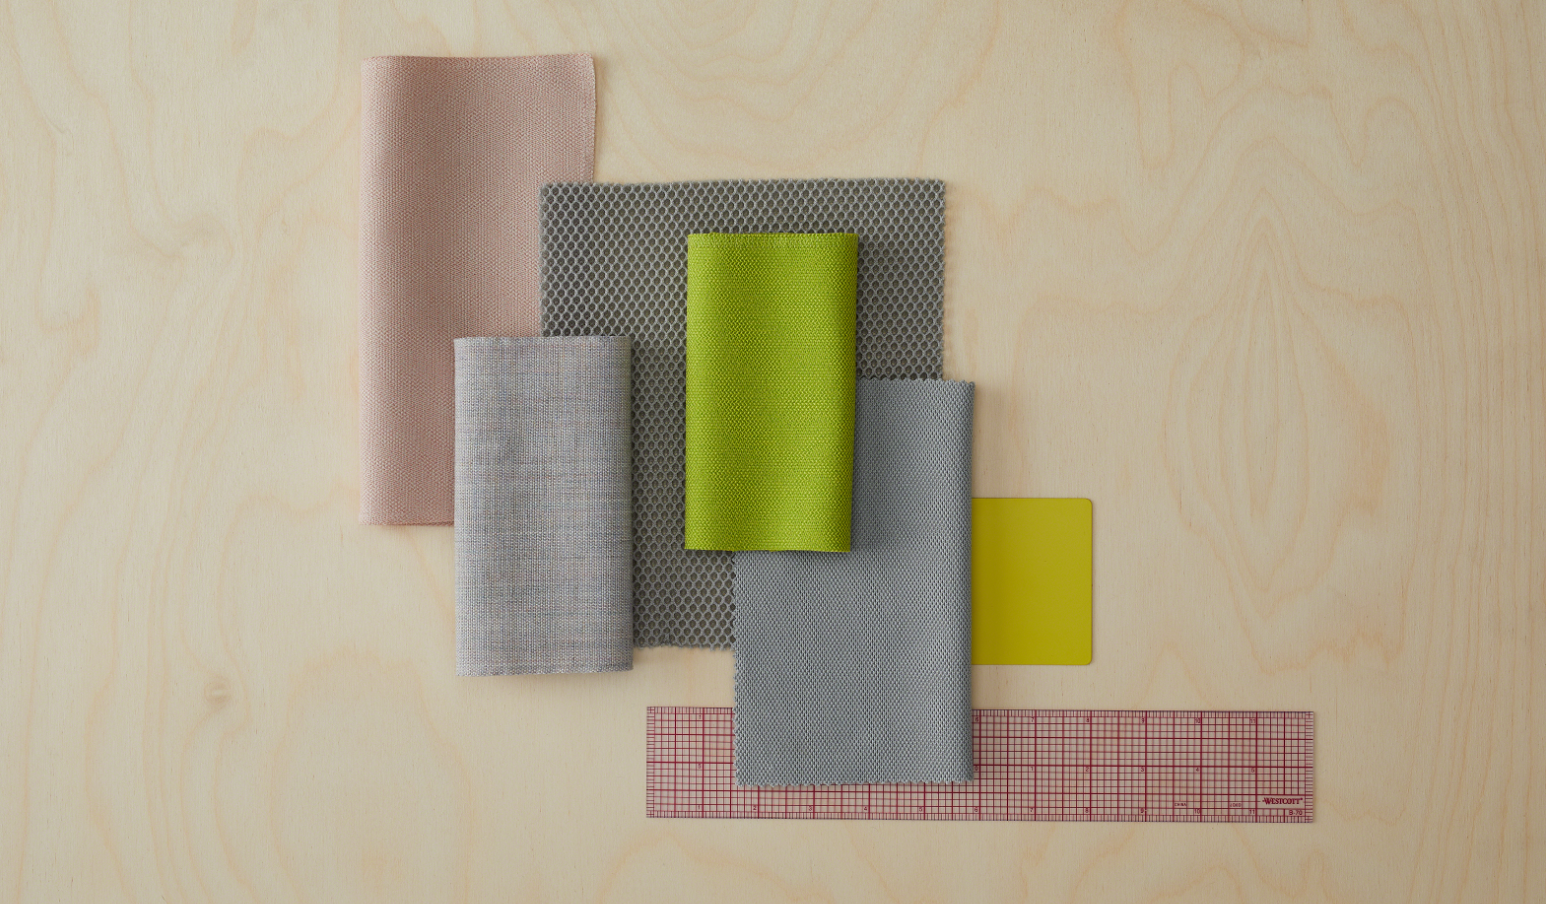 surface materials, a colourful story